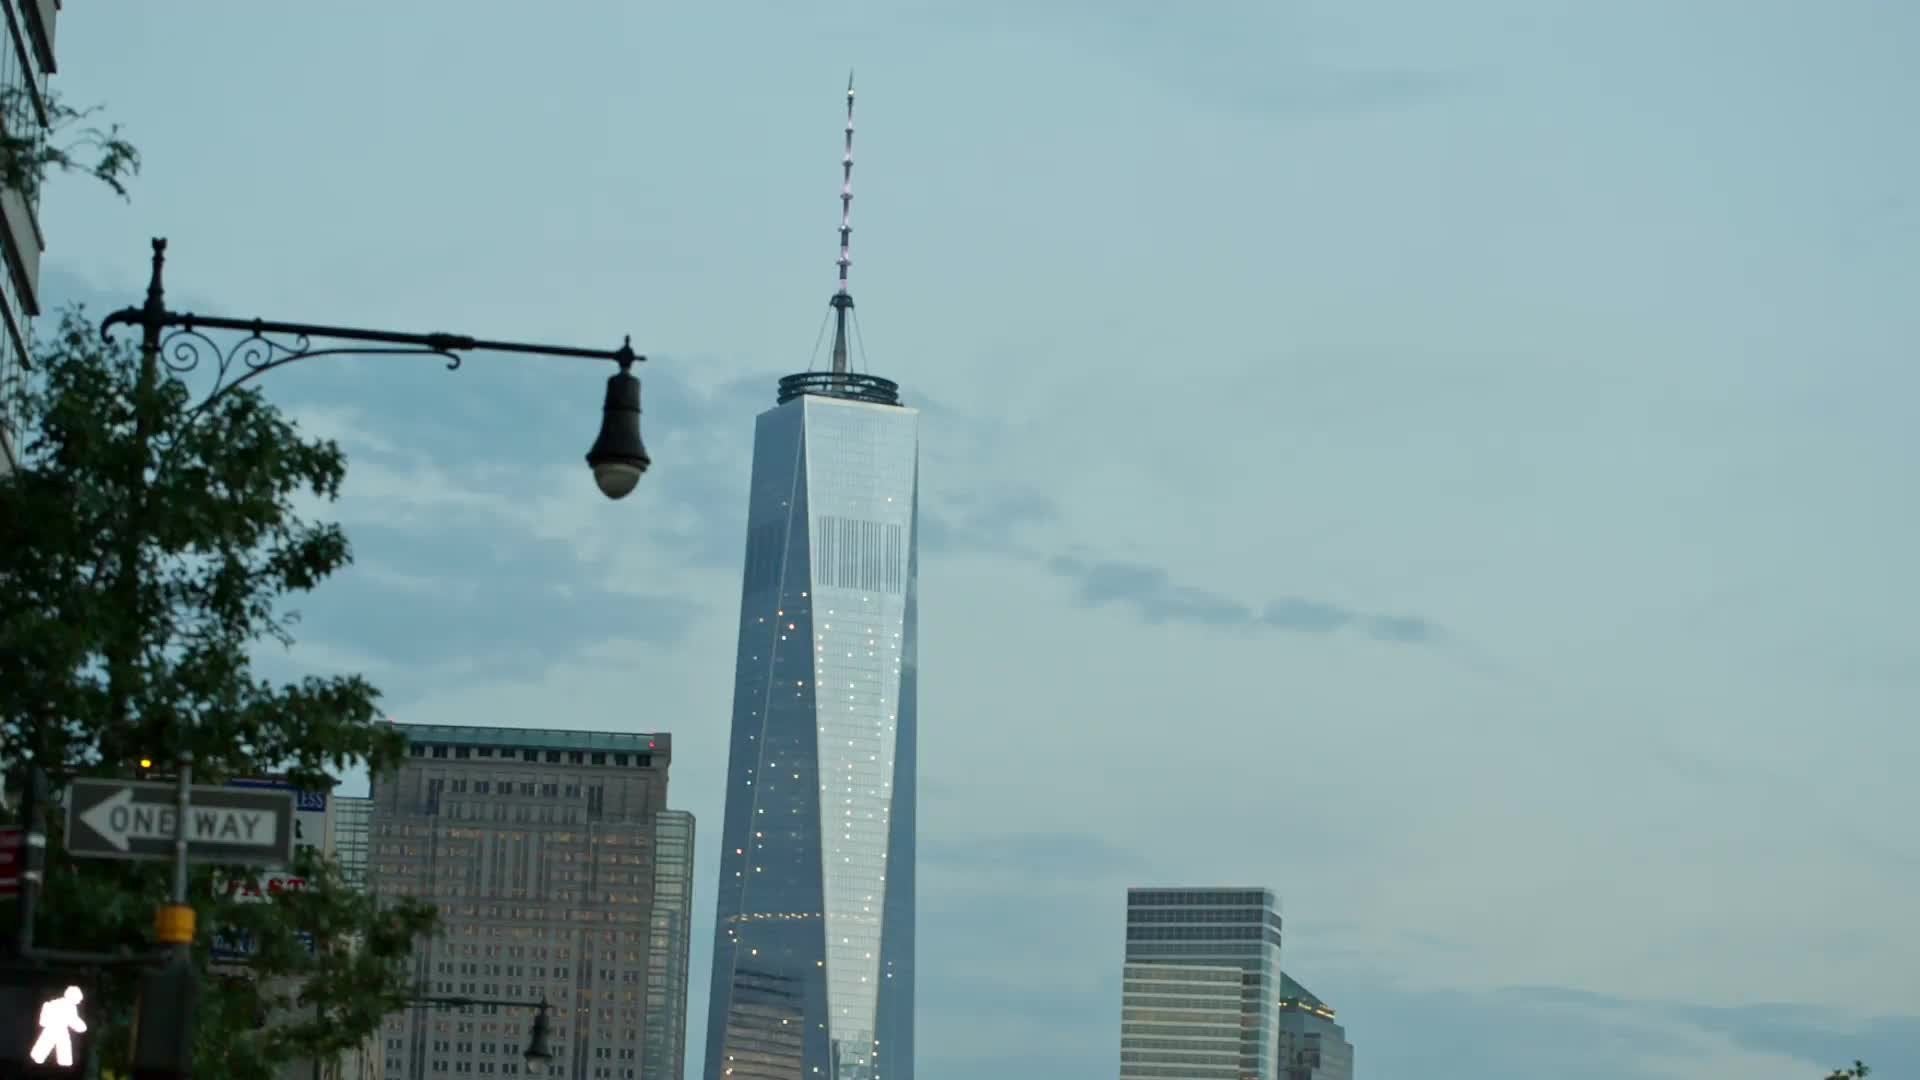 Freedom Tower view from West Side Highway in early evening with cars driving - headlights on road in NYC